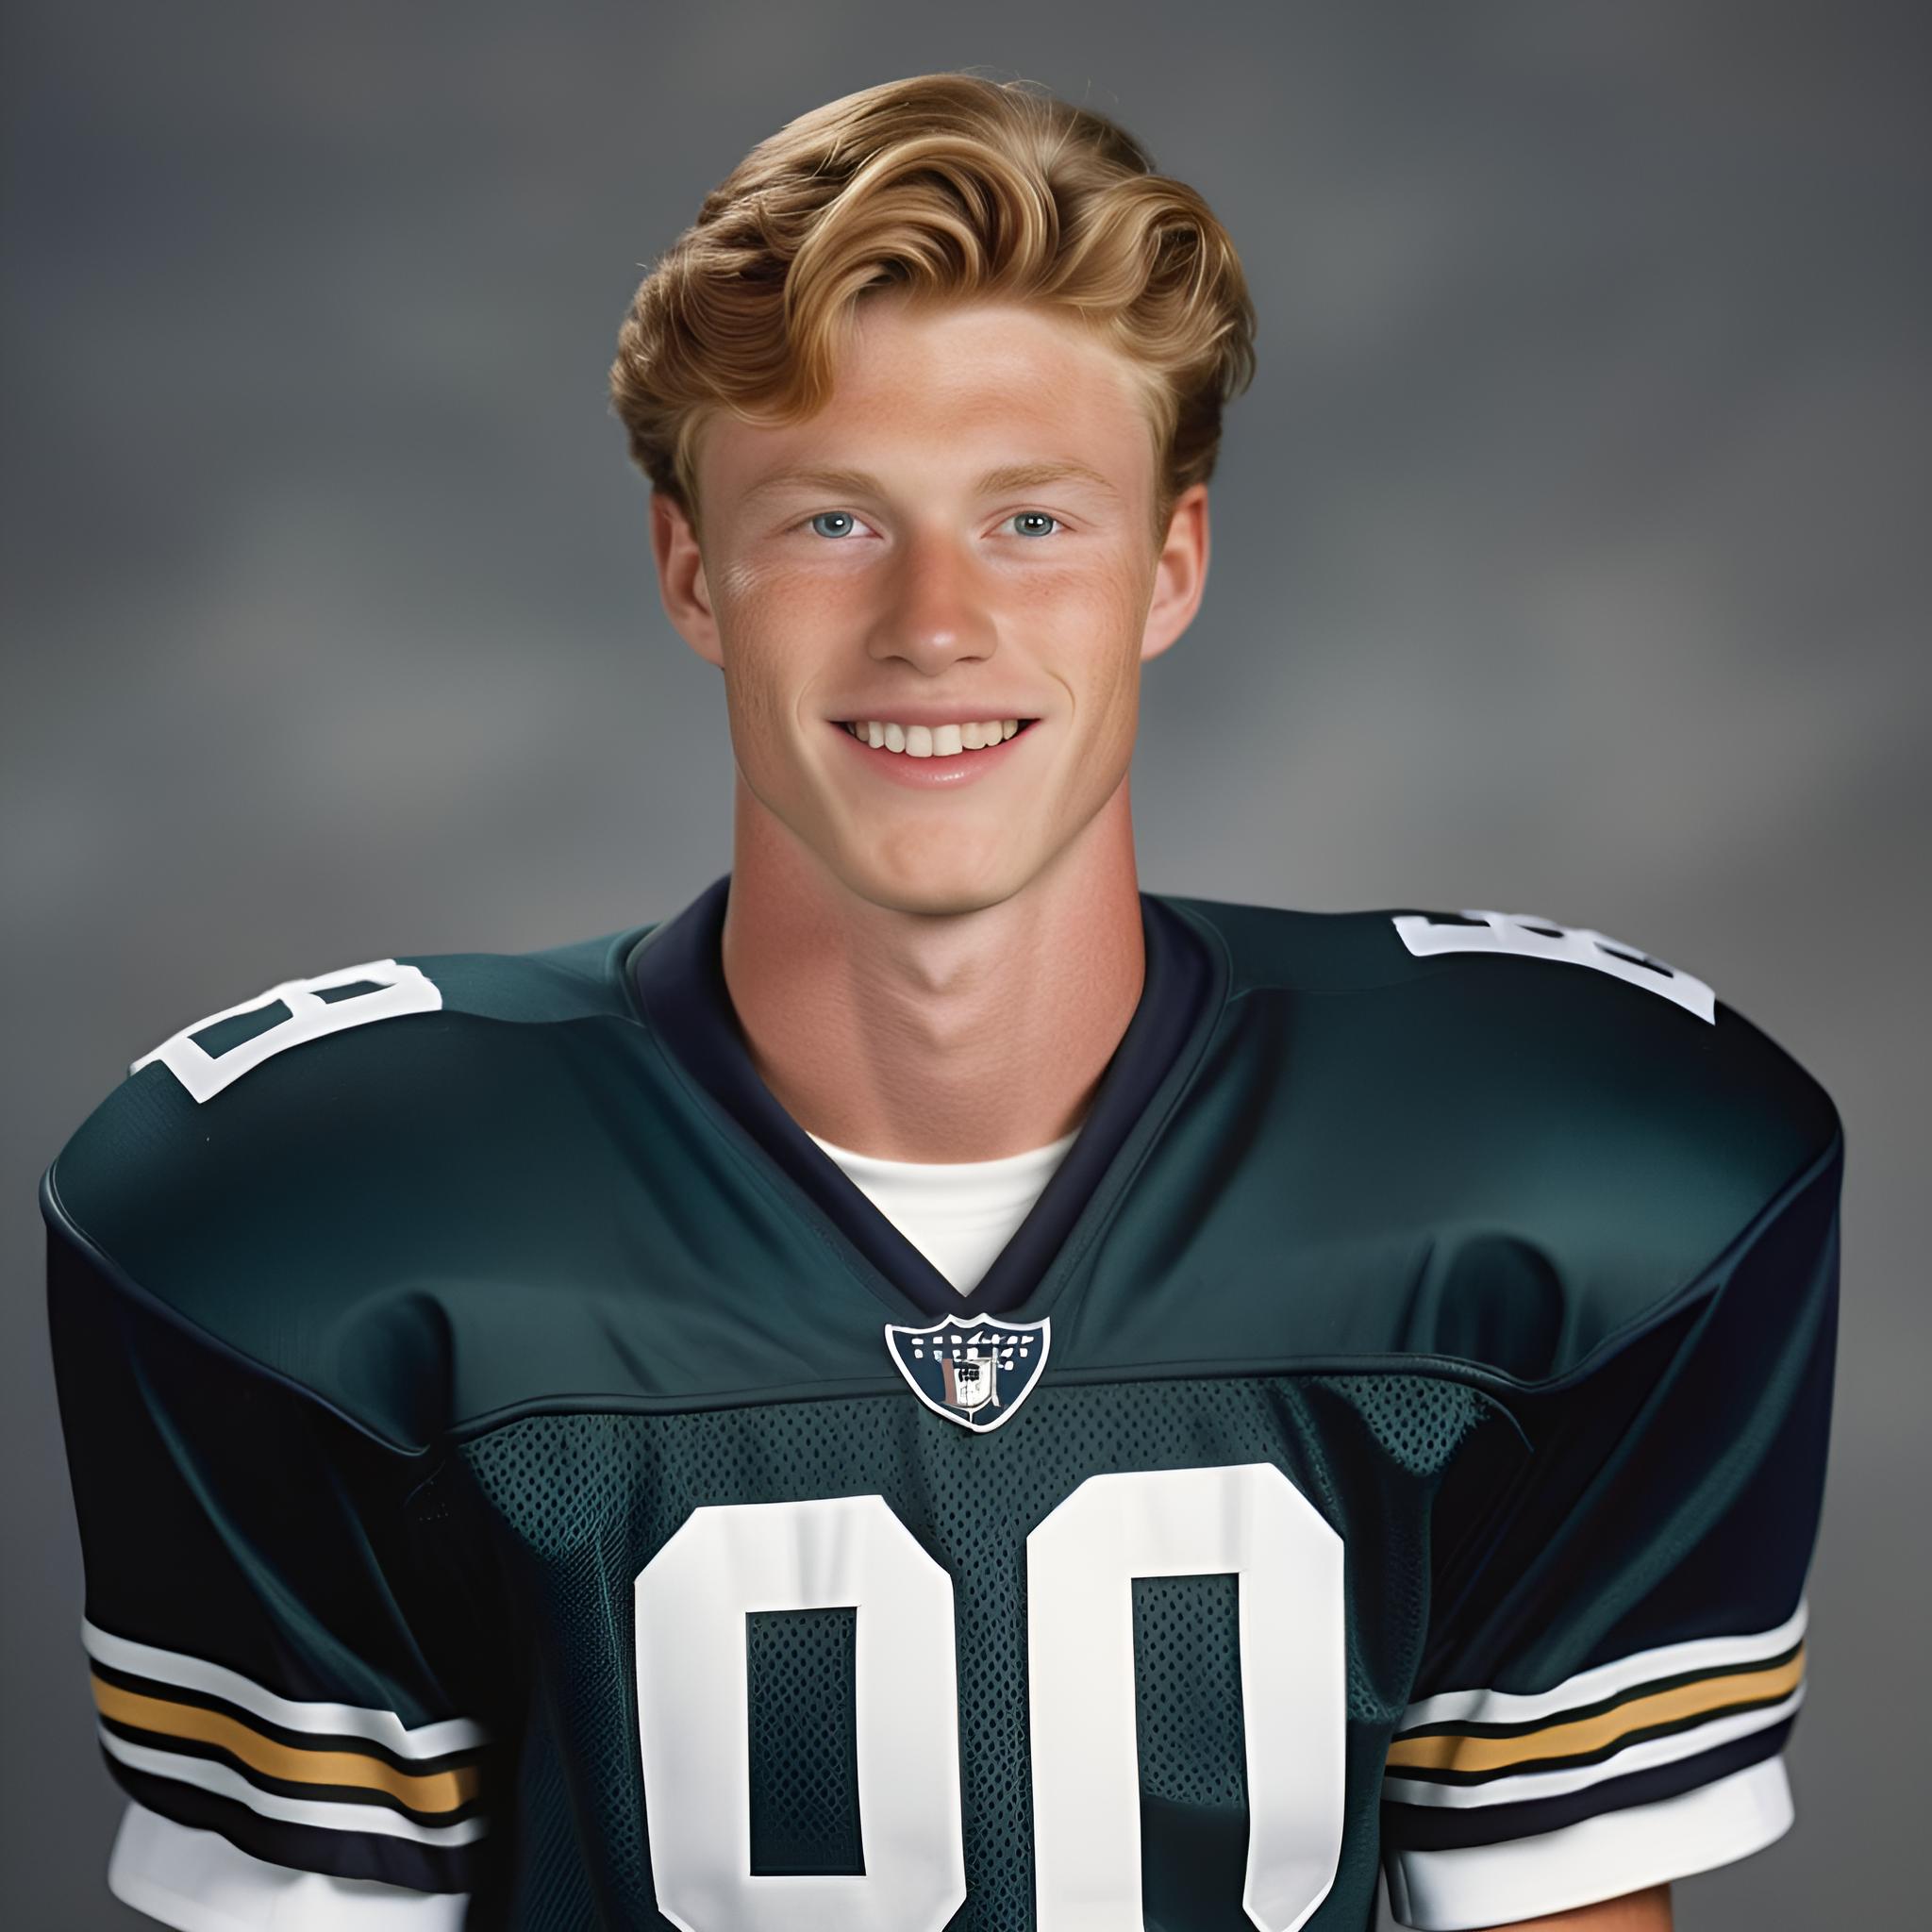 ai yearbook american football player